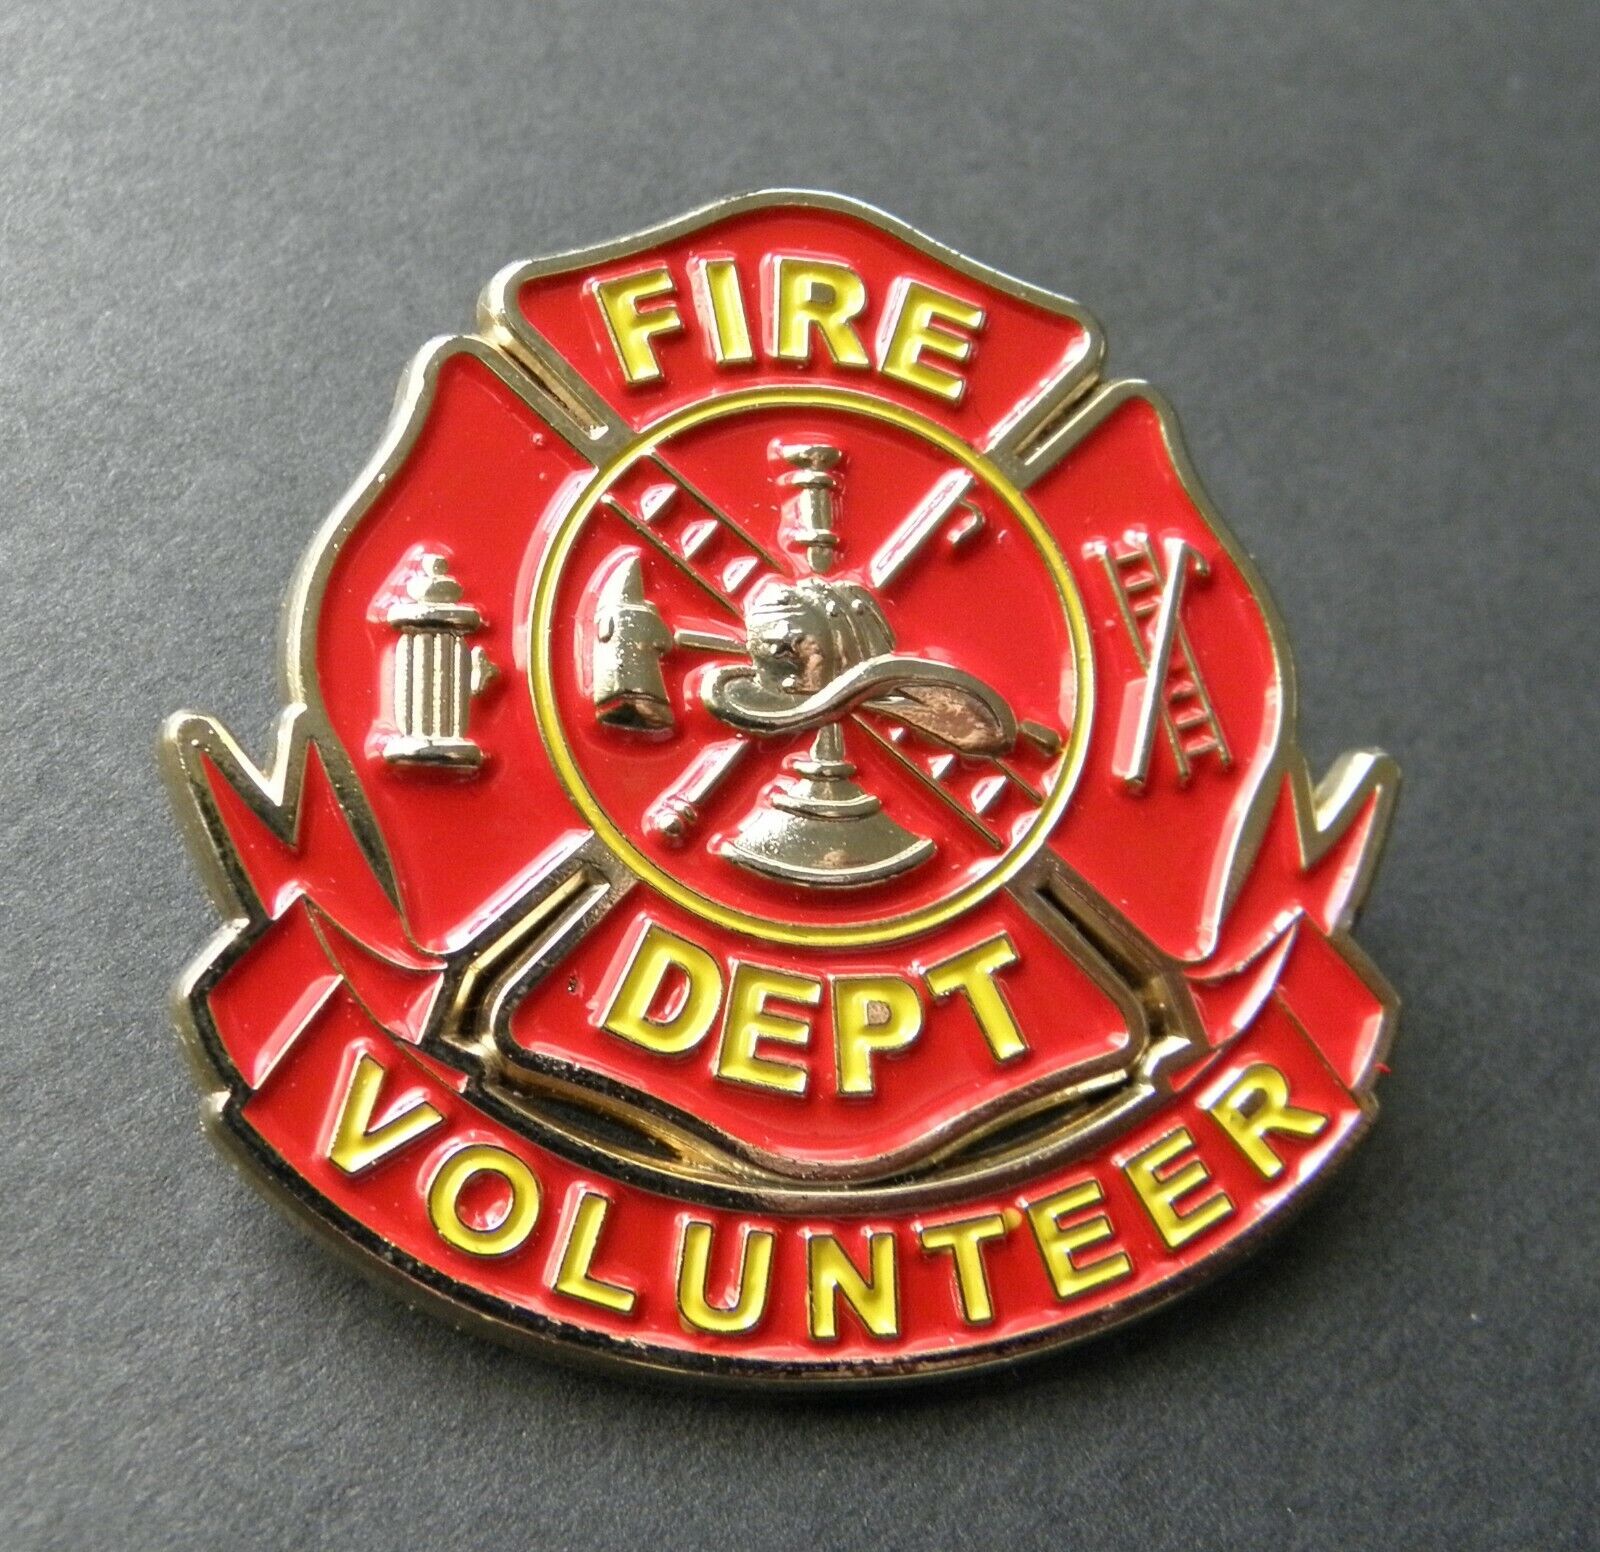 VOLUNTEER FIRE FIGHTER FIRE DEPT MEDALLION SHIELD LAPEL PIN BADGE 1.75 INCHES